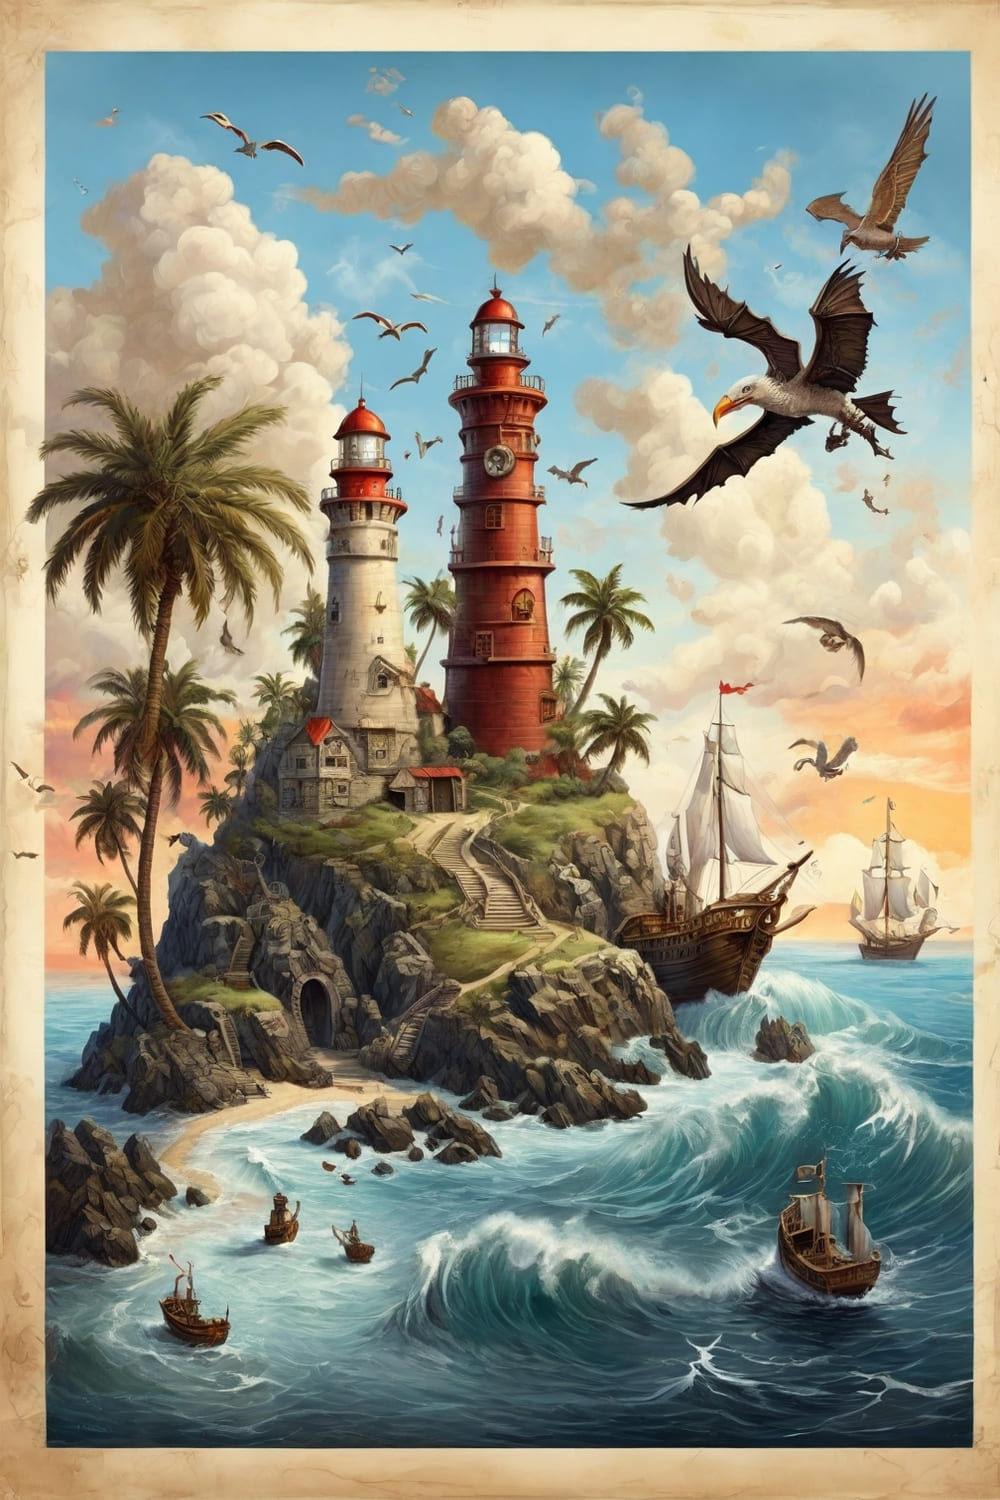 pirates, seagulls, palm trees, dragons, lighthouse on the island and ship in the waves pinterest preview image.